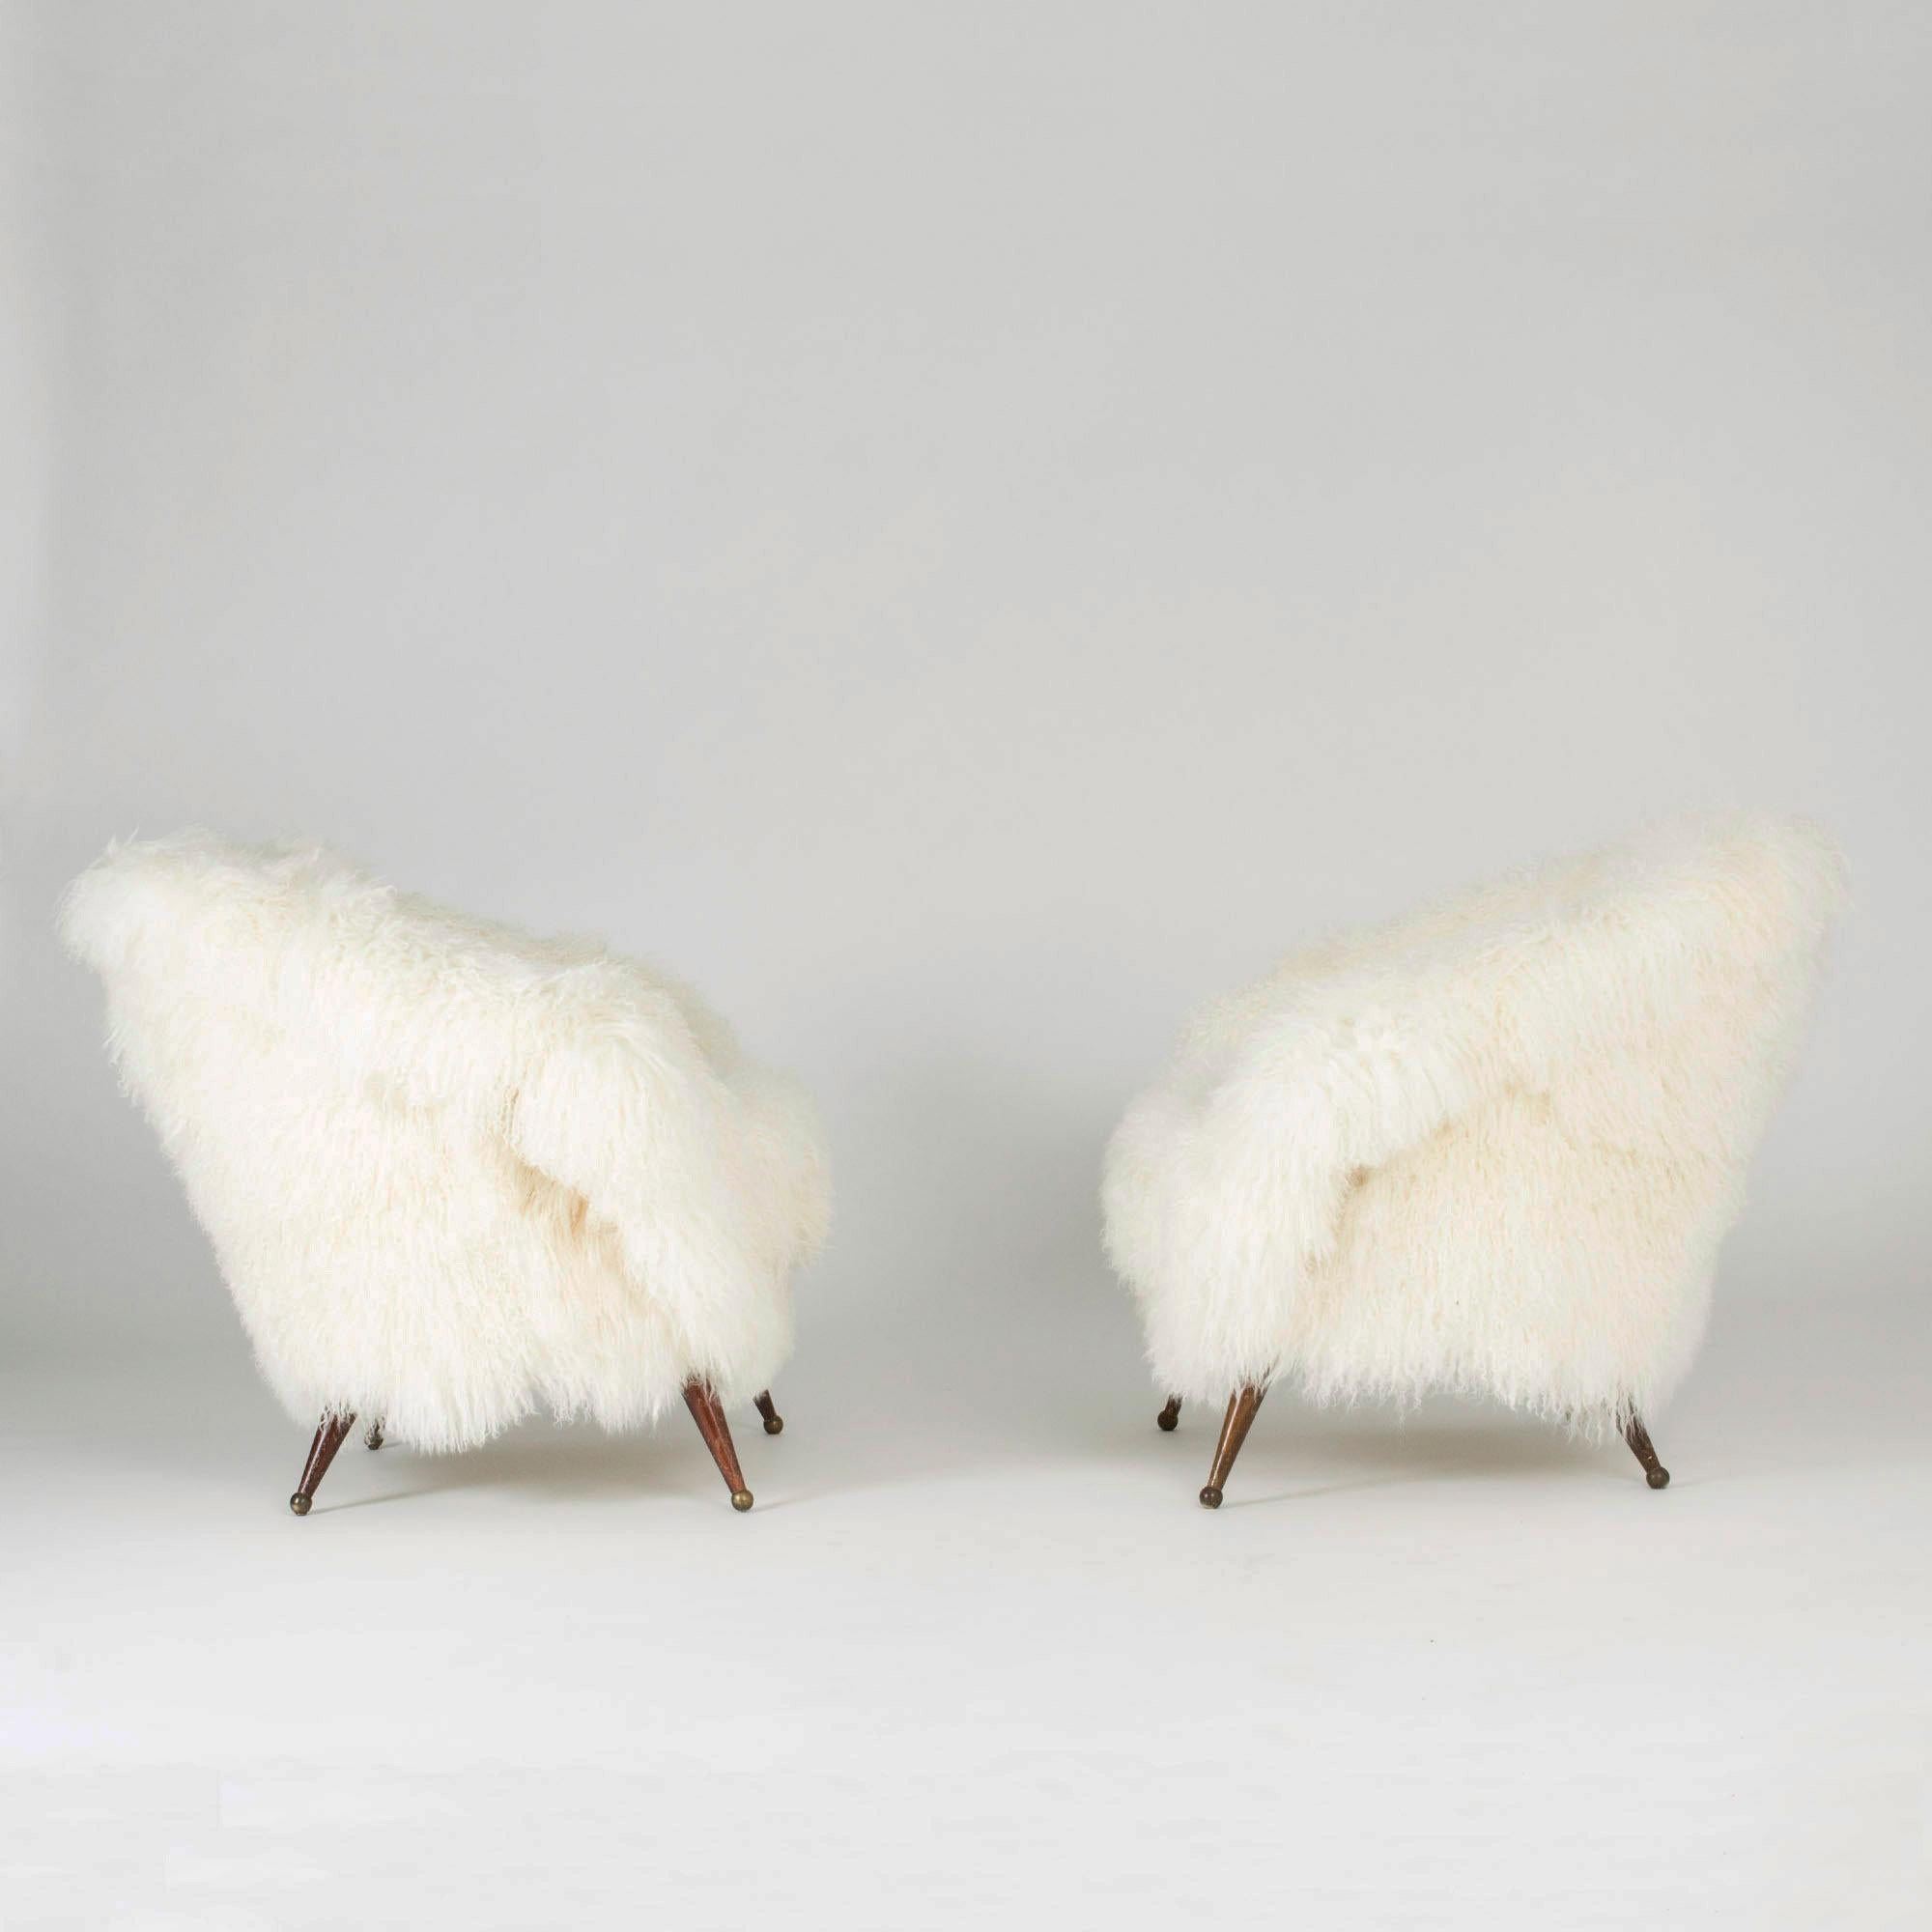 Pair of stunning “Tellus” lounge chairs by Folke Jansson, upholstered with white, long, wavy Tibetan sheepskin. Rounded, wide and low design with slender legs with brass balls as feet.